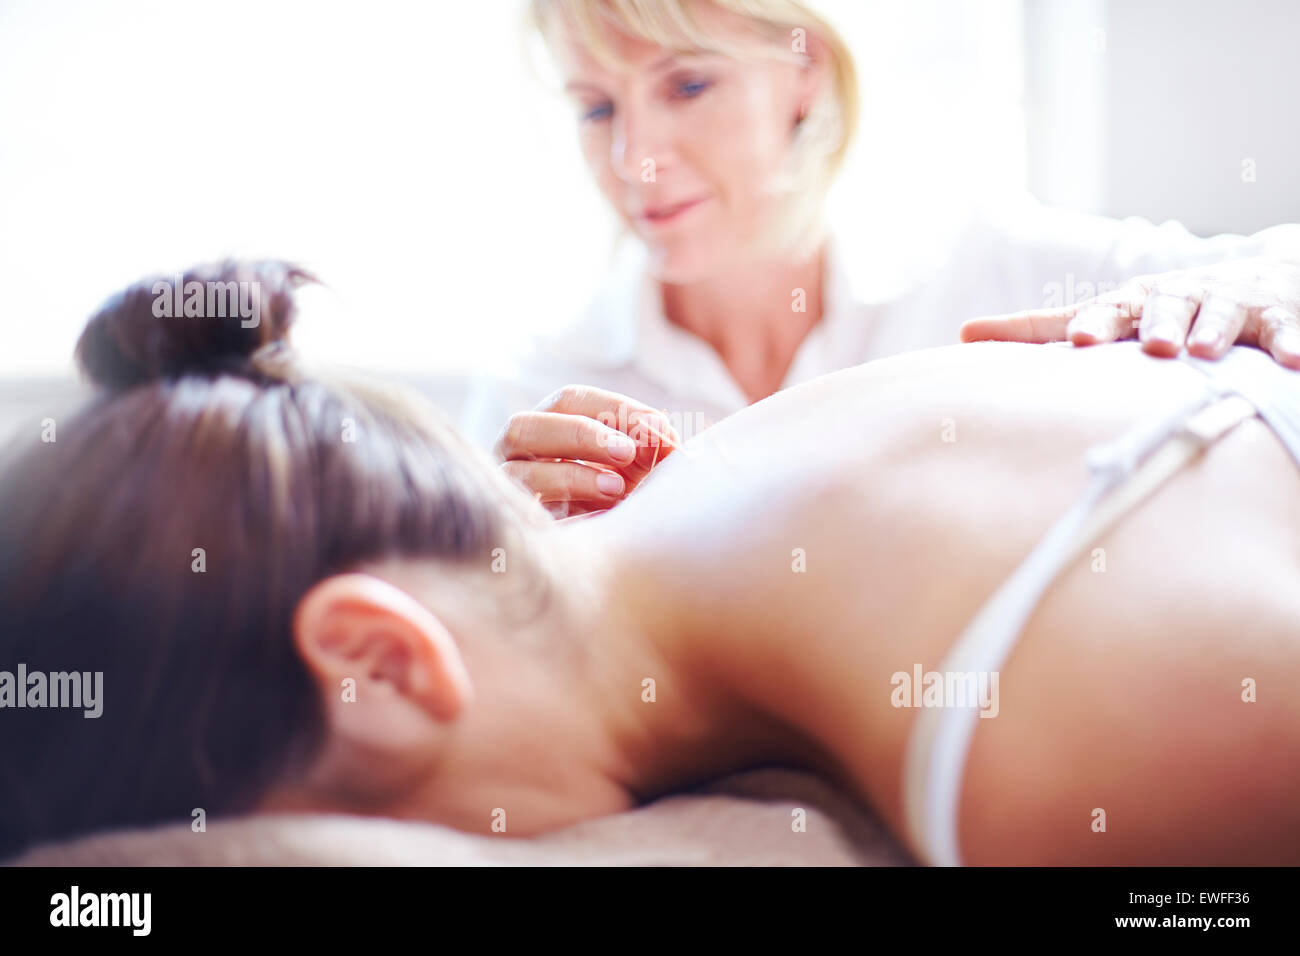 Acupuncturist applying acupuncture needle to woman’s neck Stock Photo